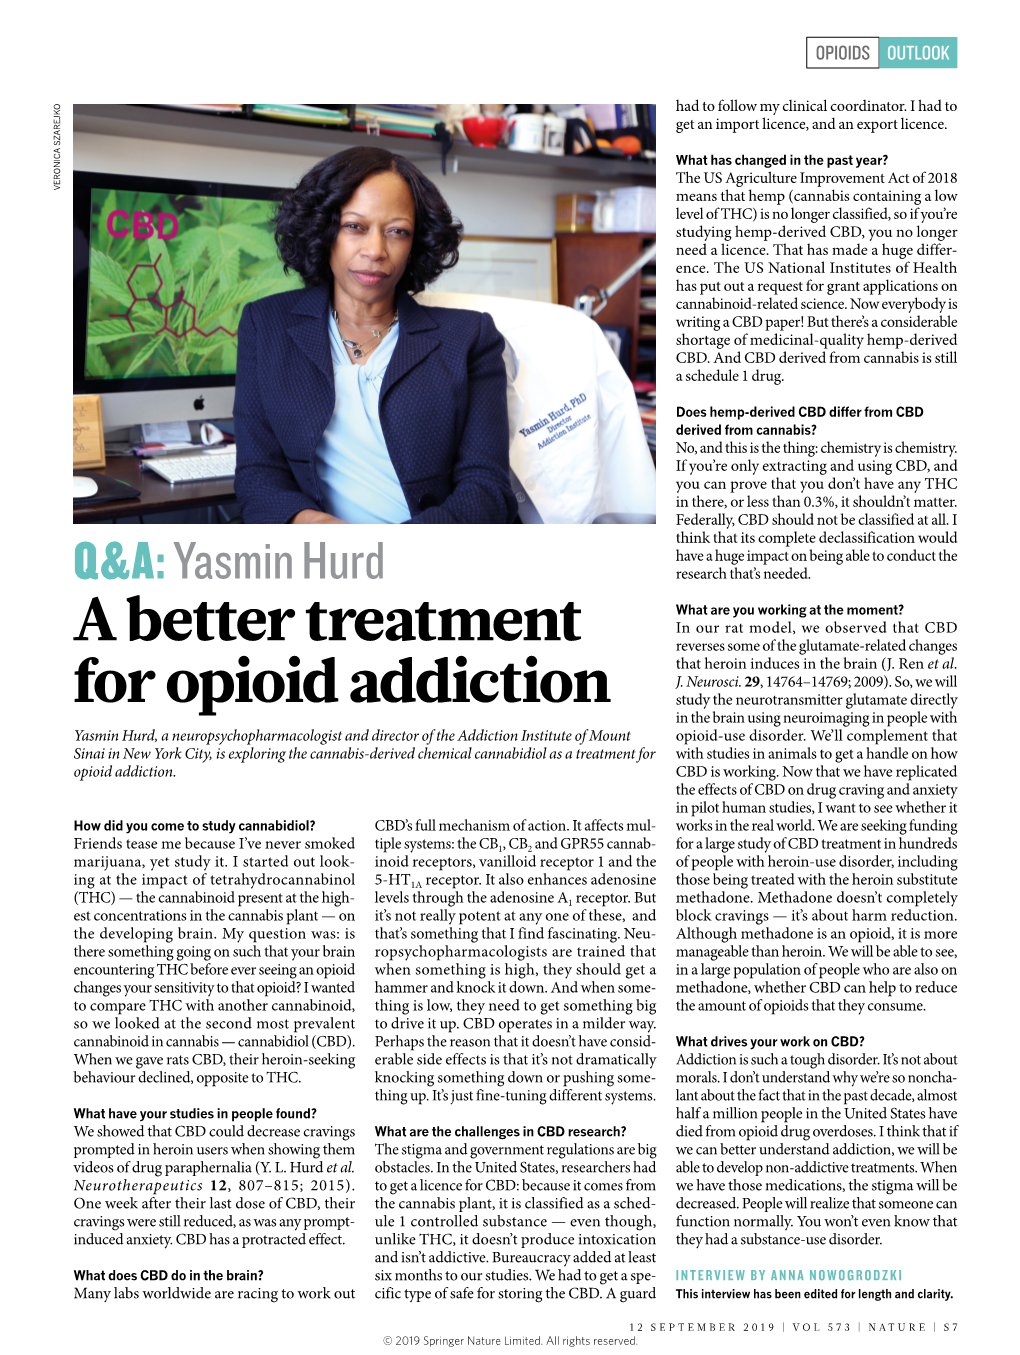 A Better Treatment for Opioid Addiction